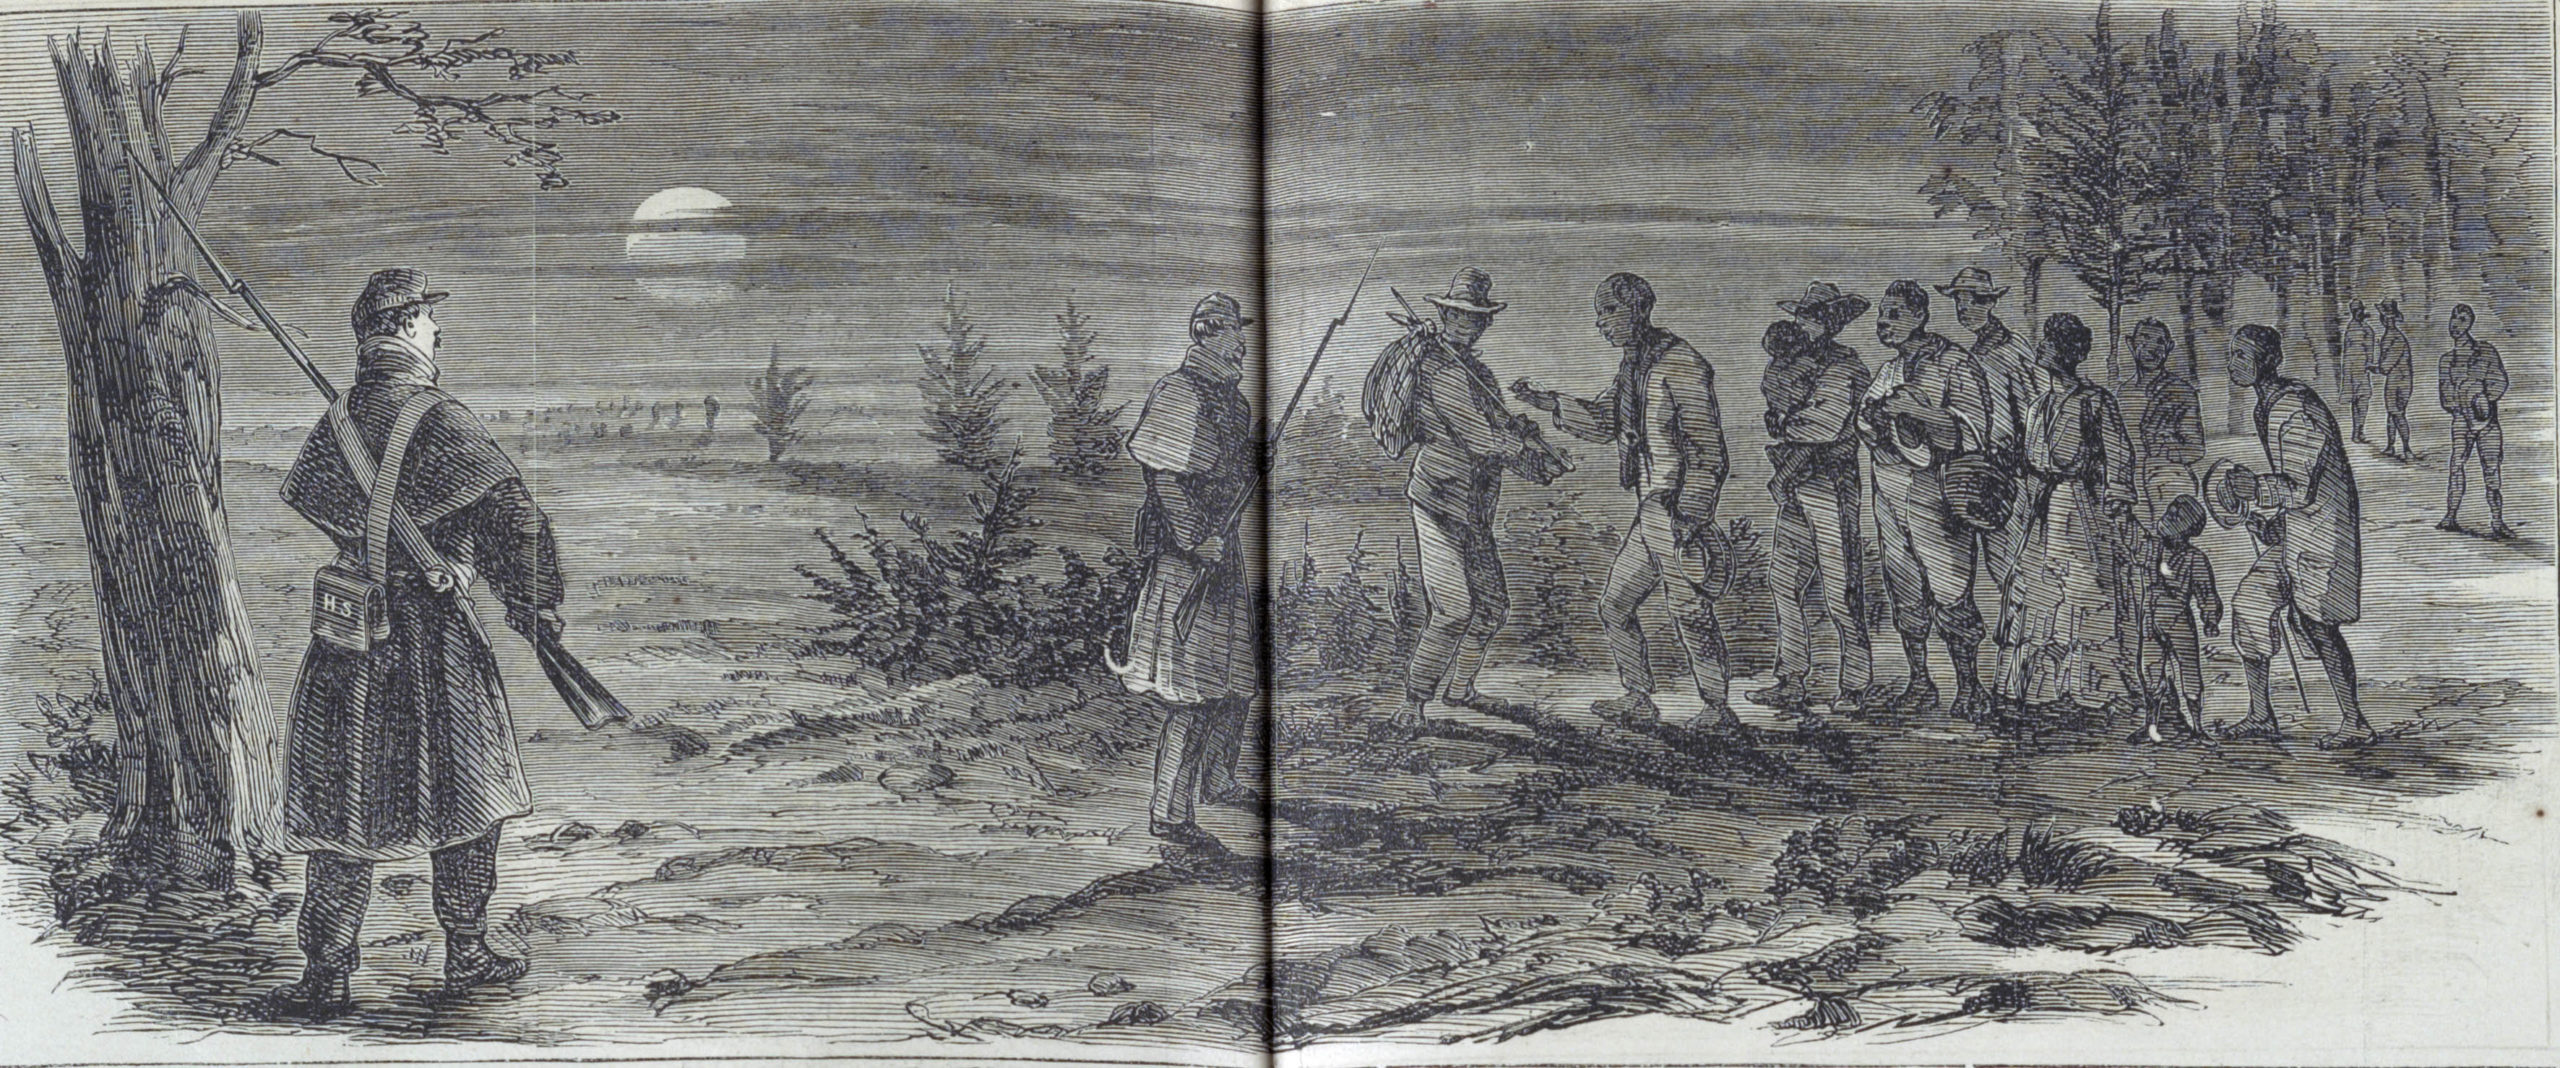 Refugees meeting U.S. Army officers at night and requesting asylum (detail), Stampede among the Negroes in Virginia - their arrival at Fortress Monroe / from sketches by our Special Artist in Fortress Monroe. Illustration in Frank Leslie’s Illustrated Newspaper, June 8, 1861, wood engraving ; 40.4 x 54.3 cm (Library of Congress)